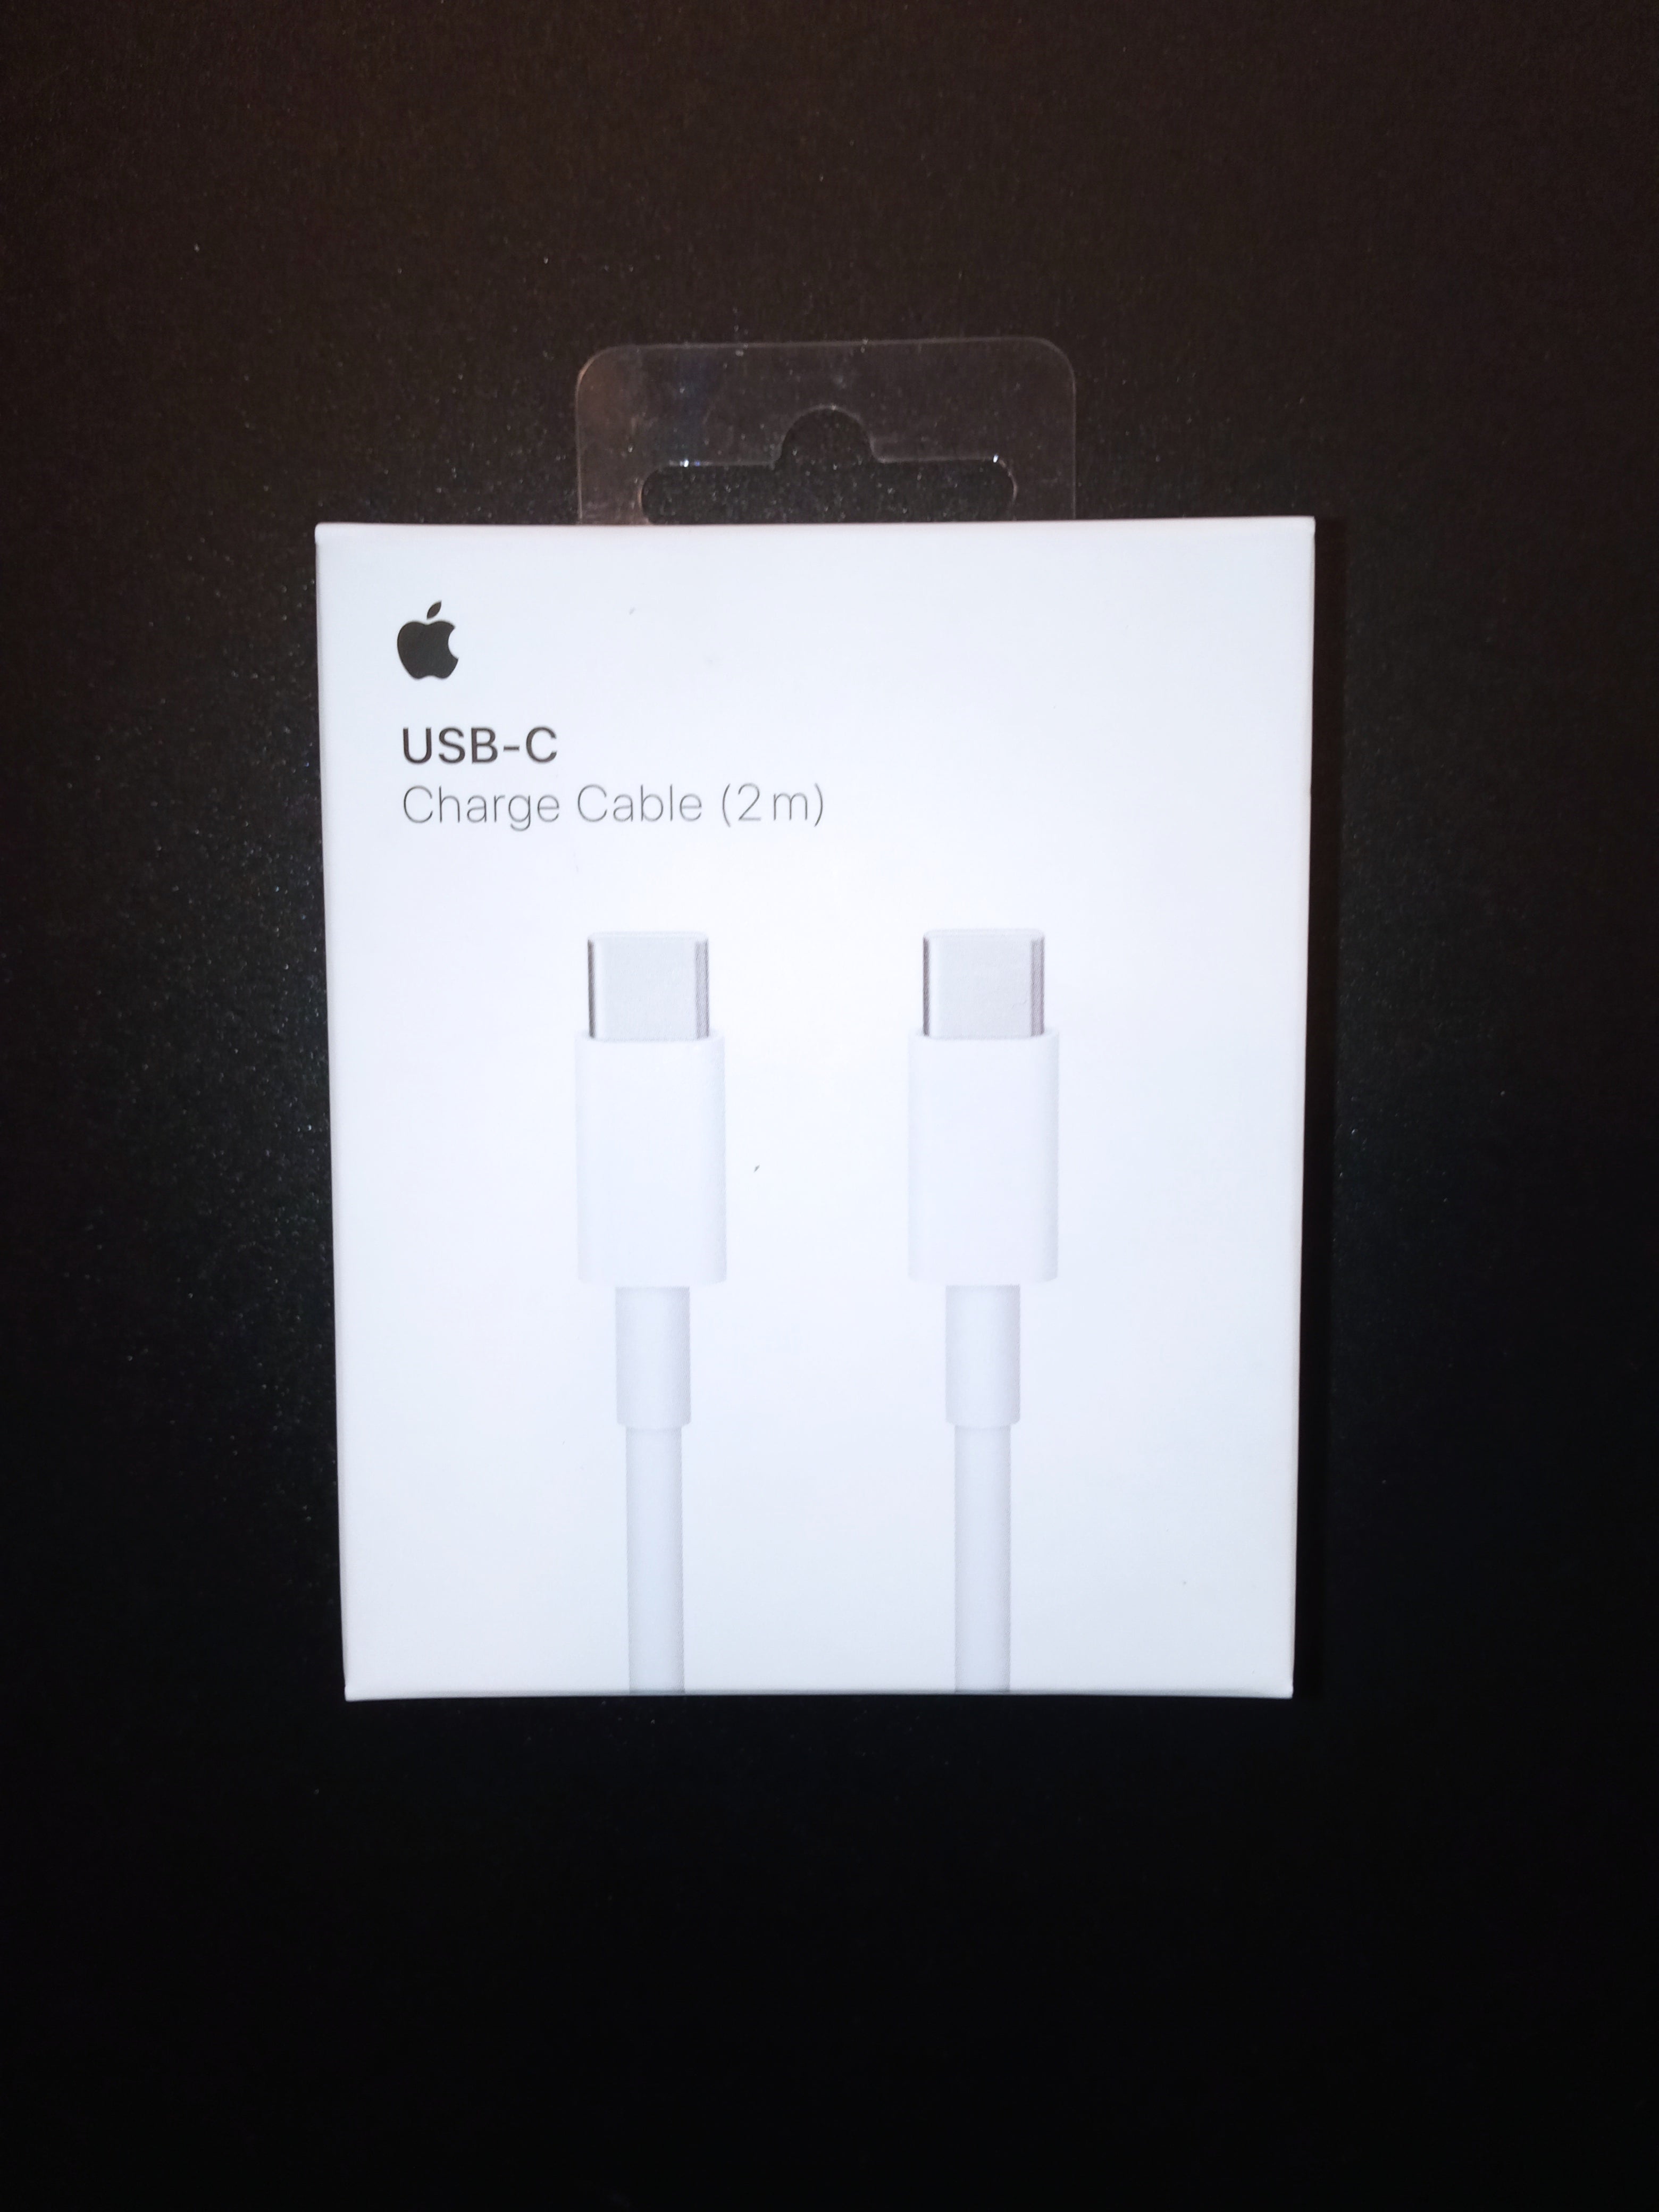 Apple USB-C Charge Cable (2m) A1739 Genuine Box Packed - One Year Warranty